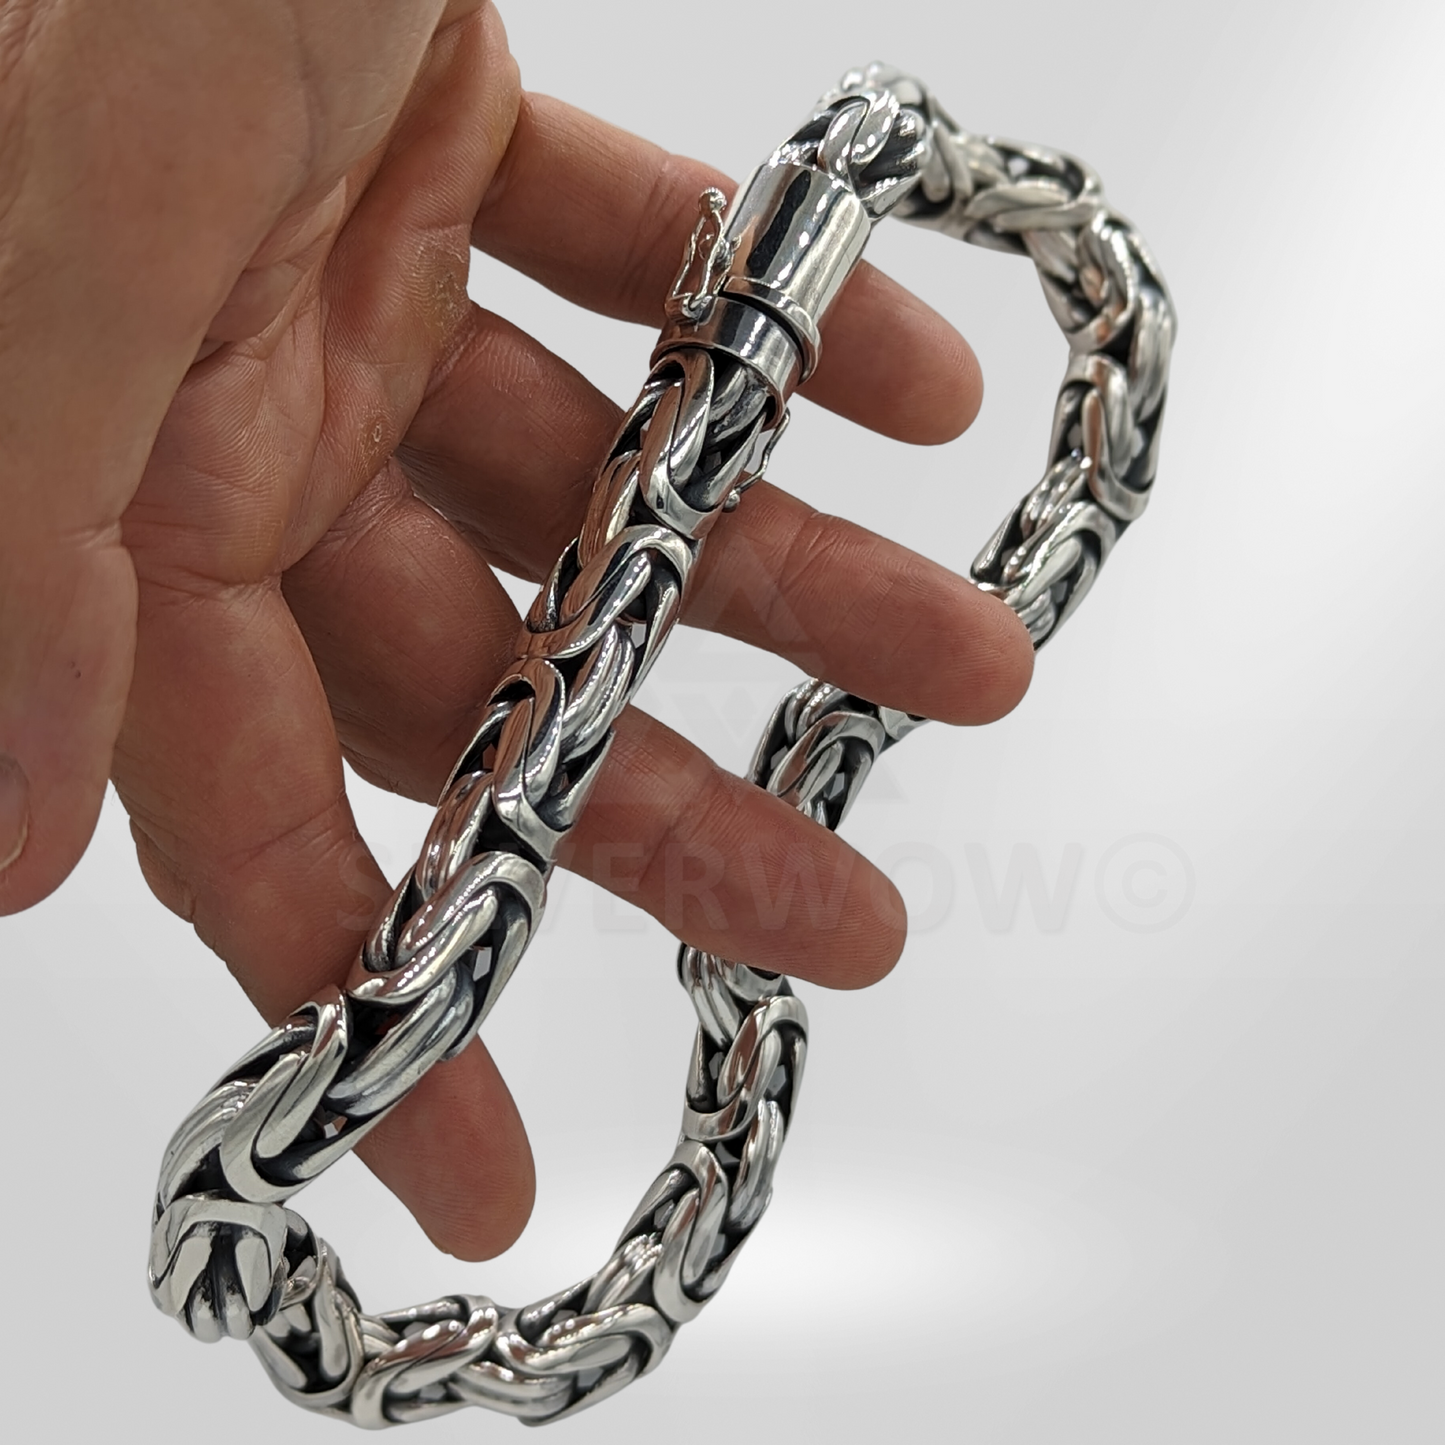 PL23 - 10mm Bali Chain with BOX Clasp